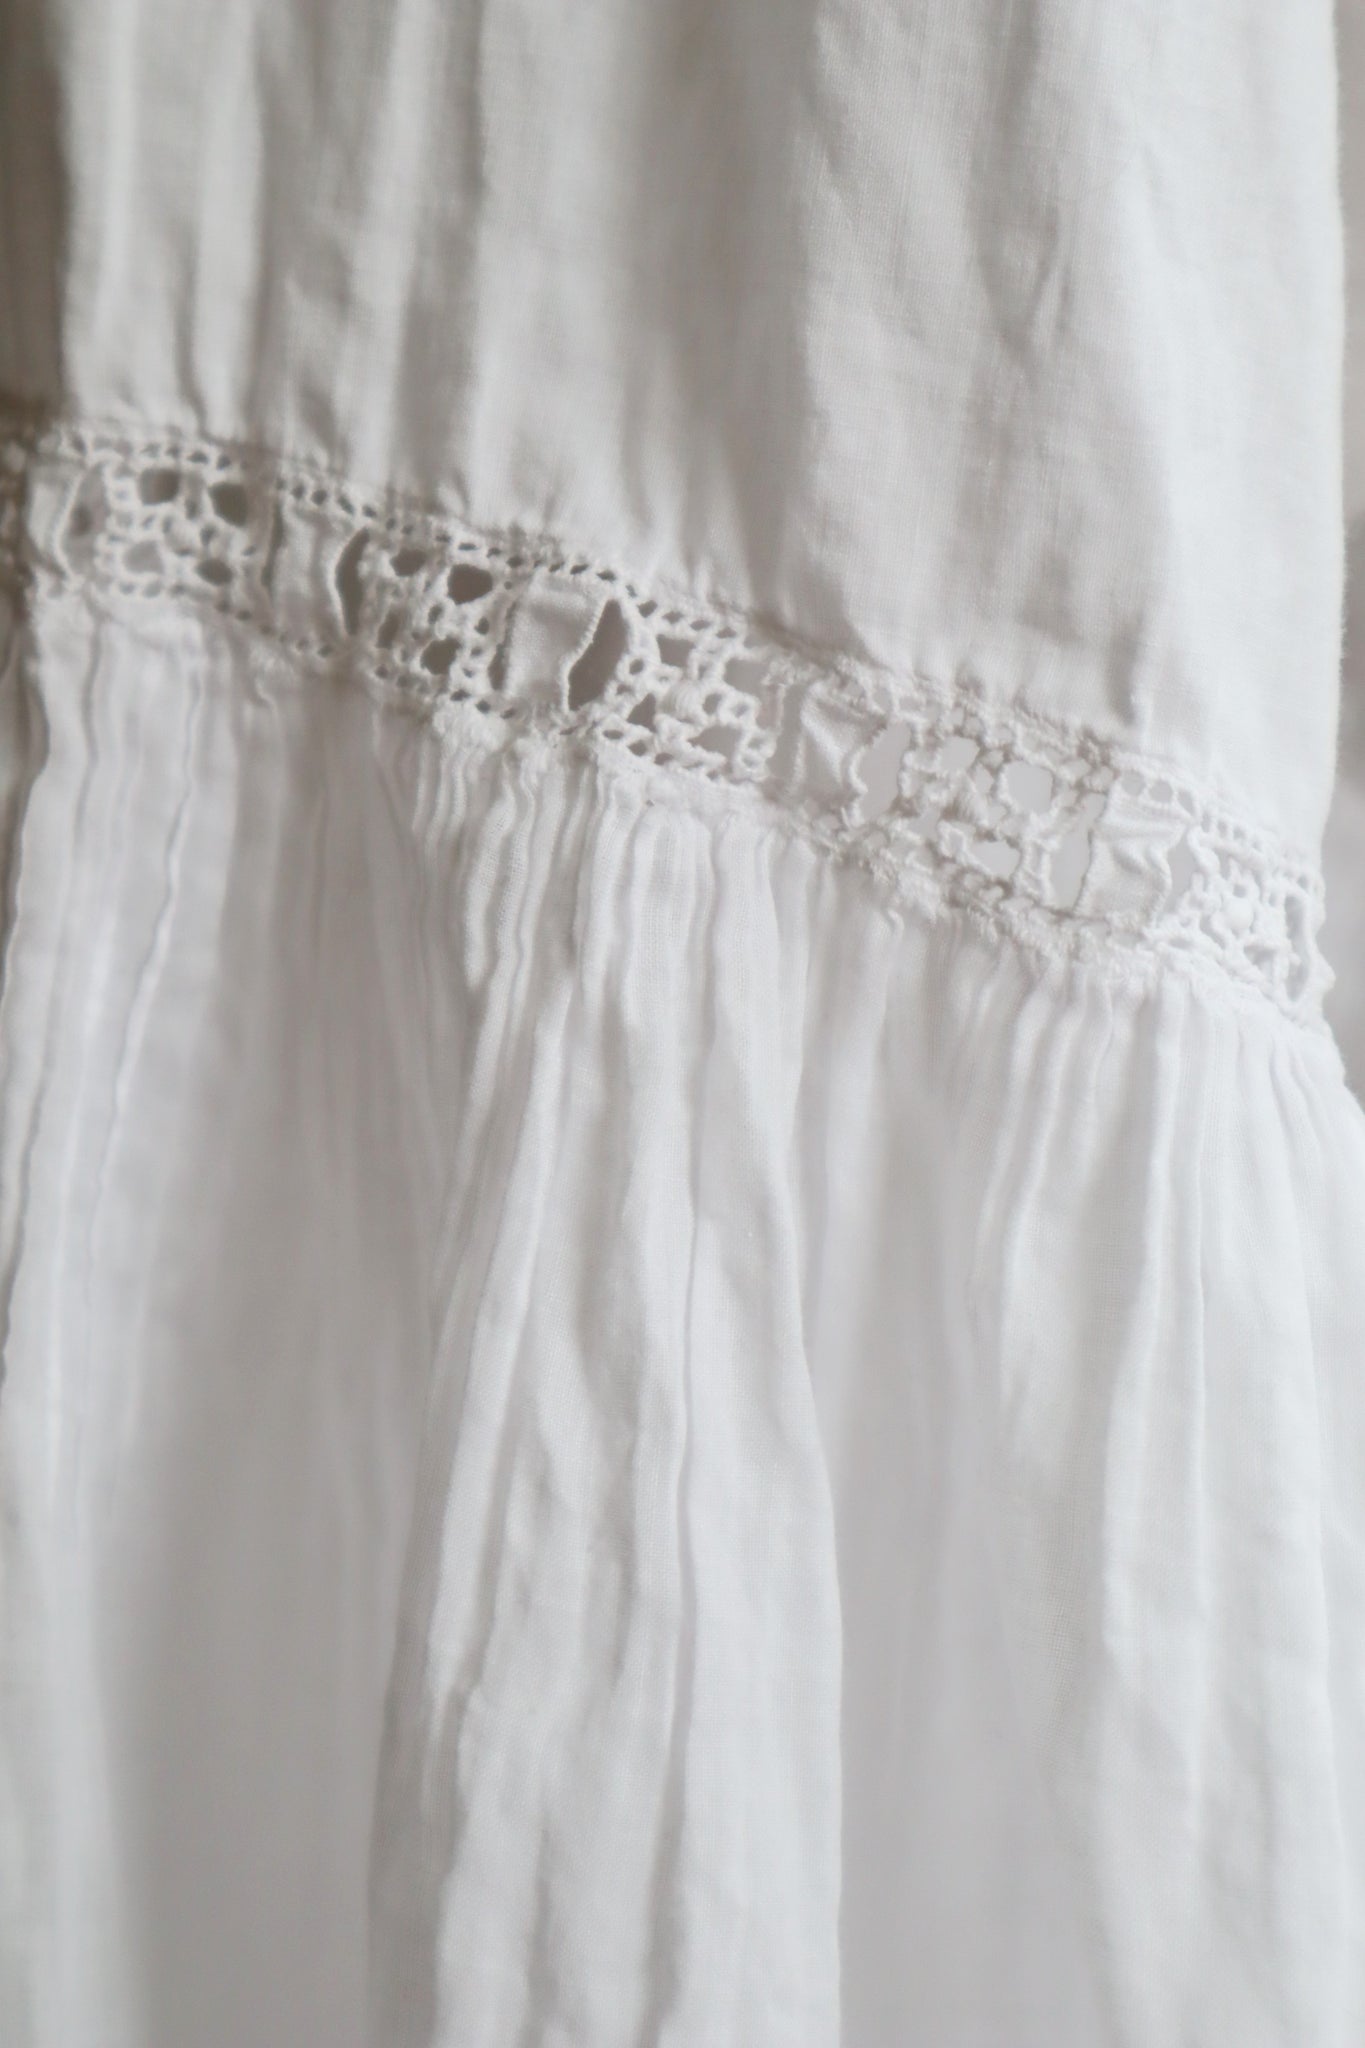 Late 1800s French All Hand Sewn Bloomer Pants